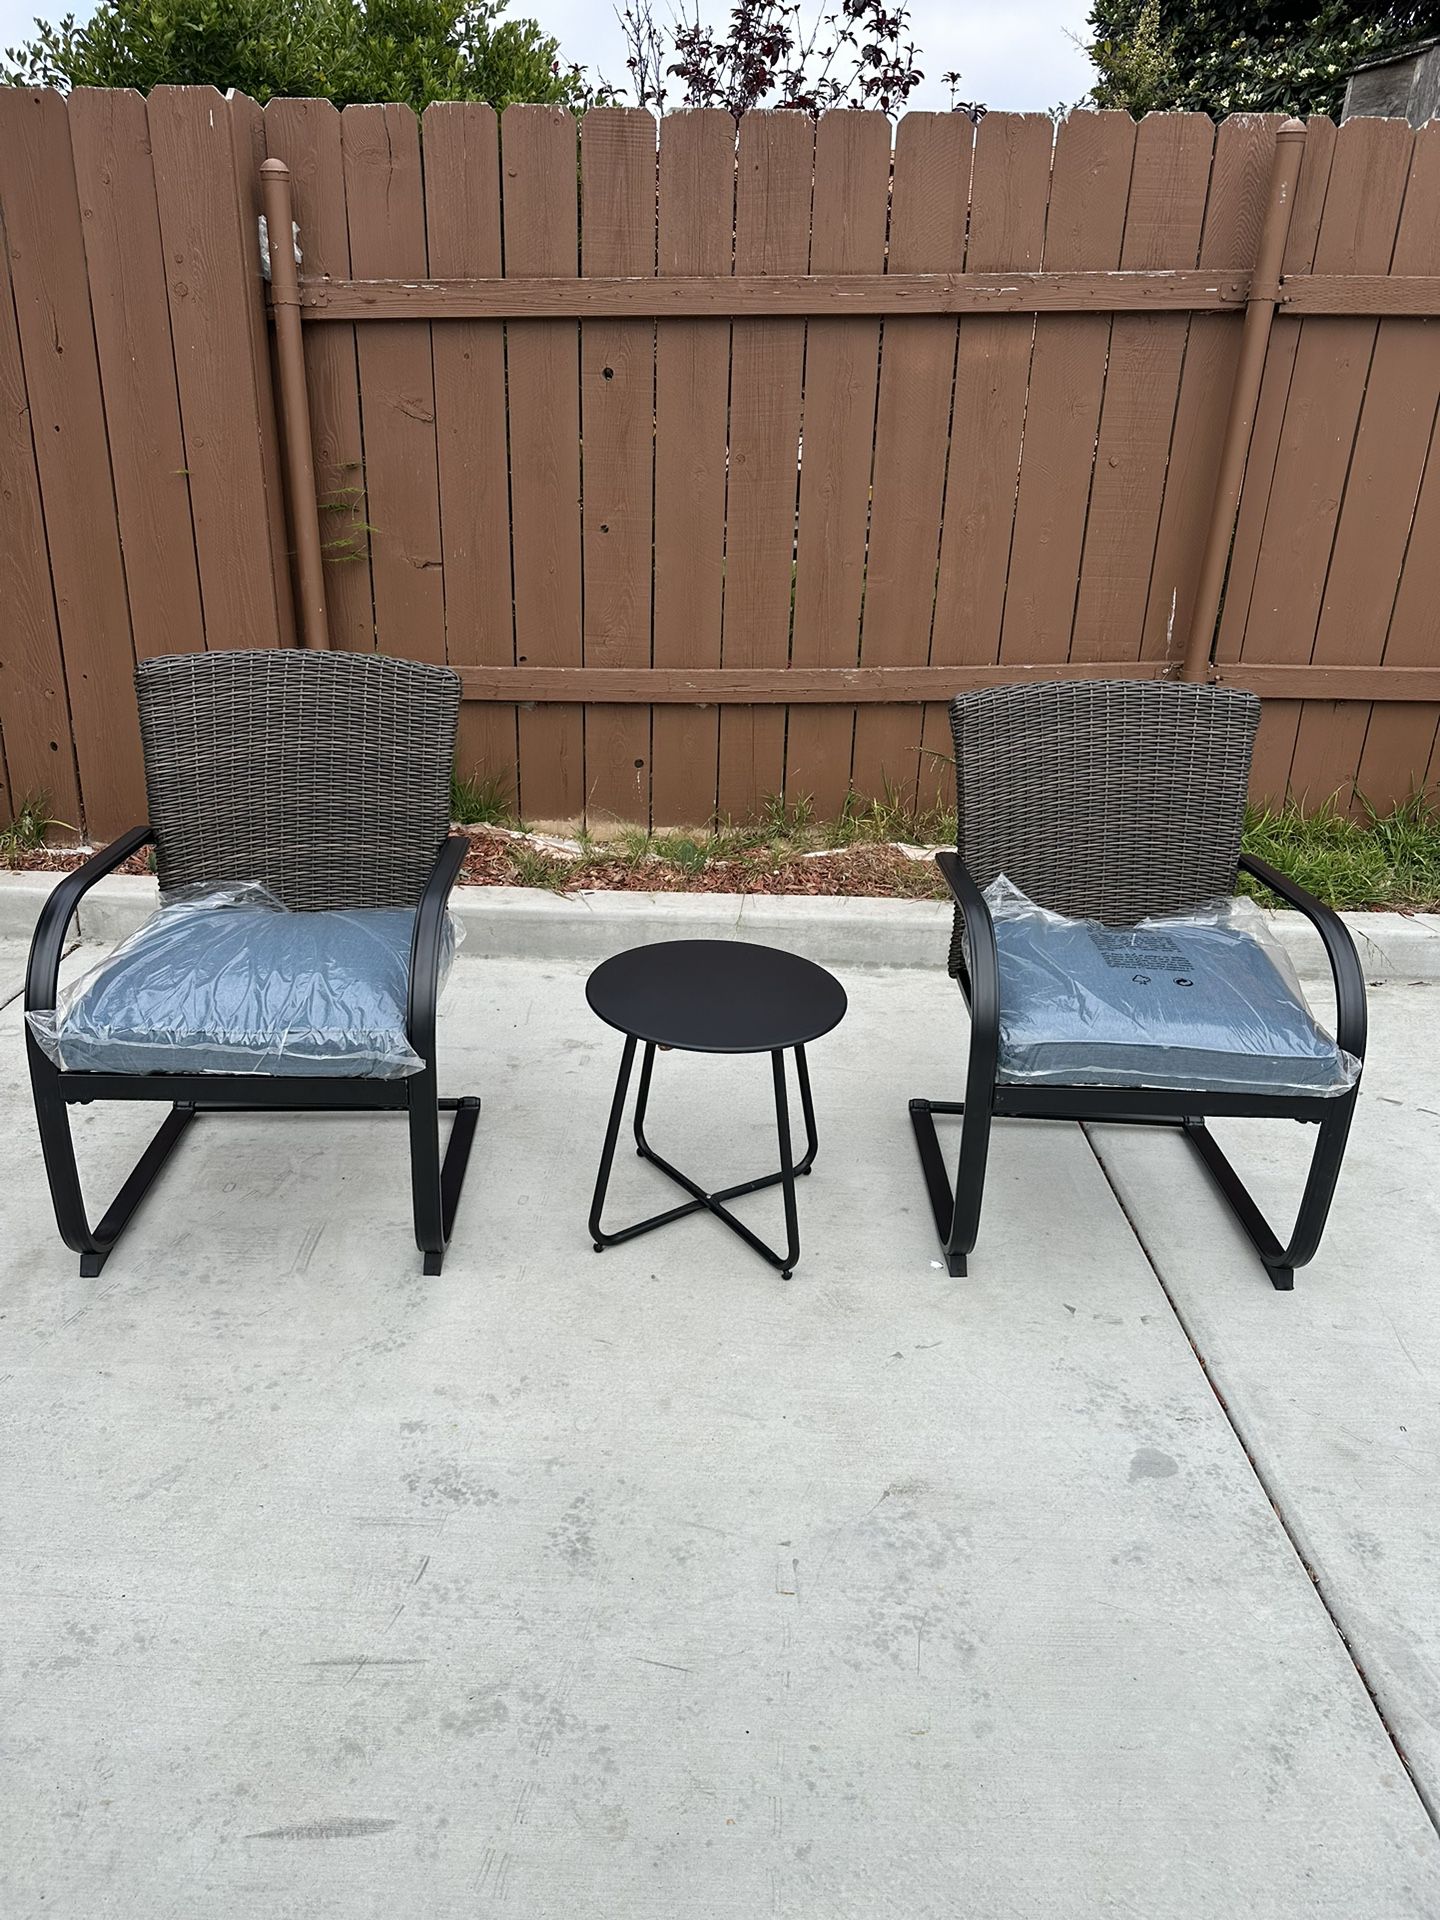 2 chair table Patio Set